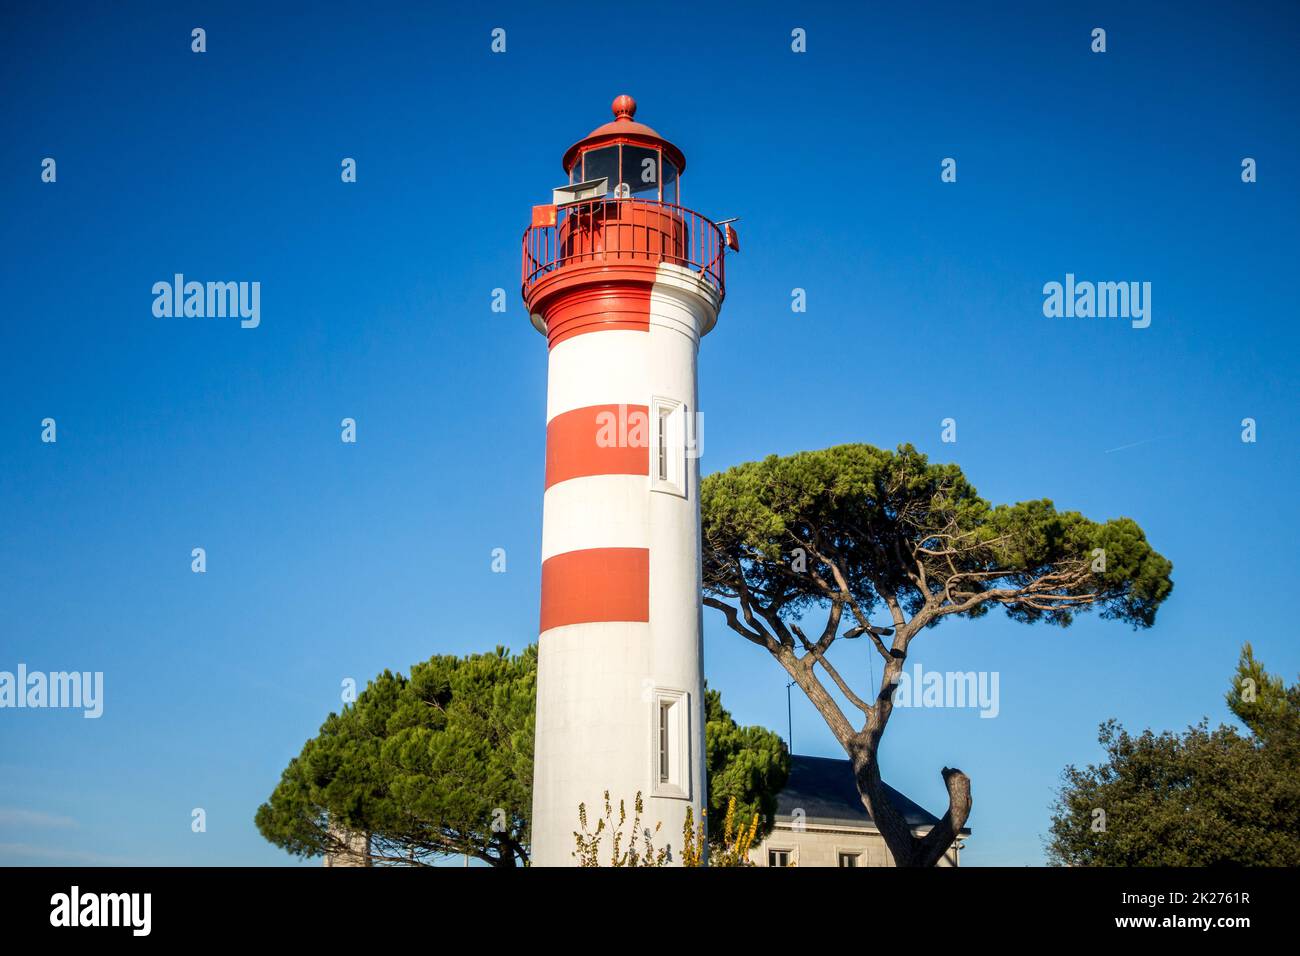 Old red lighthouse in La Rochelle harbor, France Stock Photo